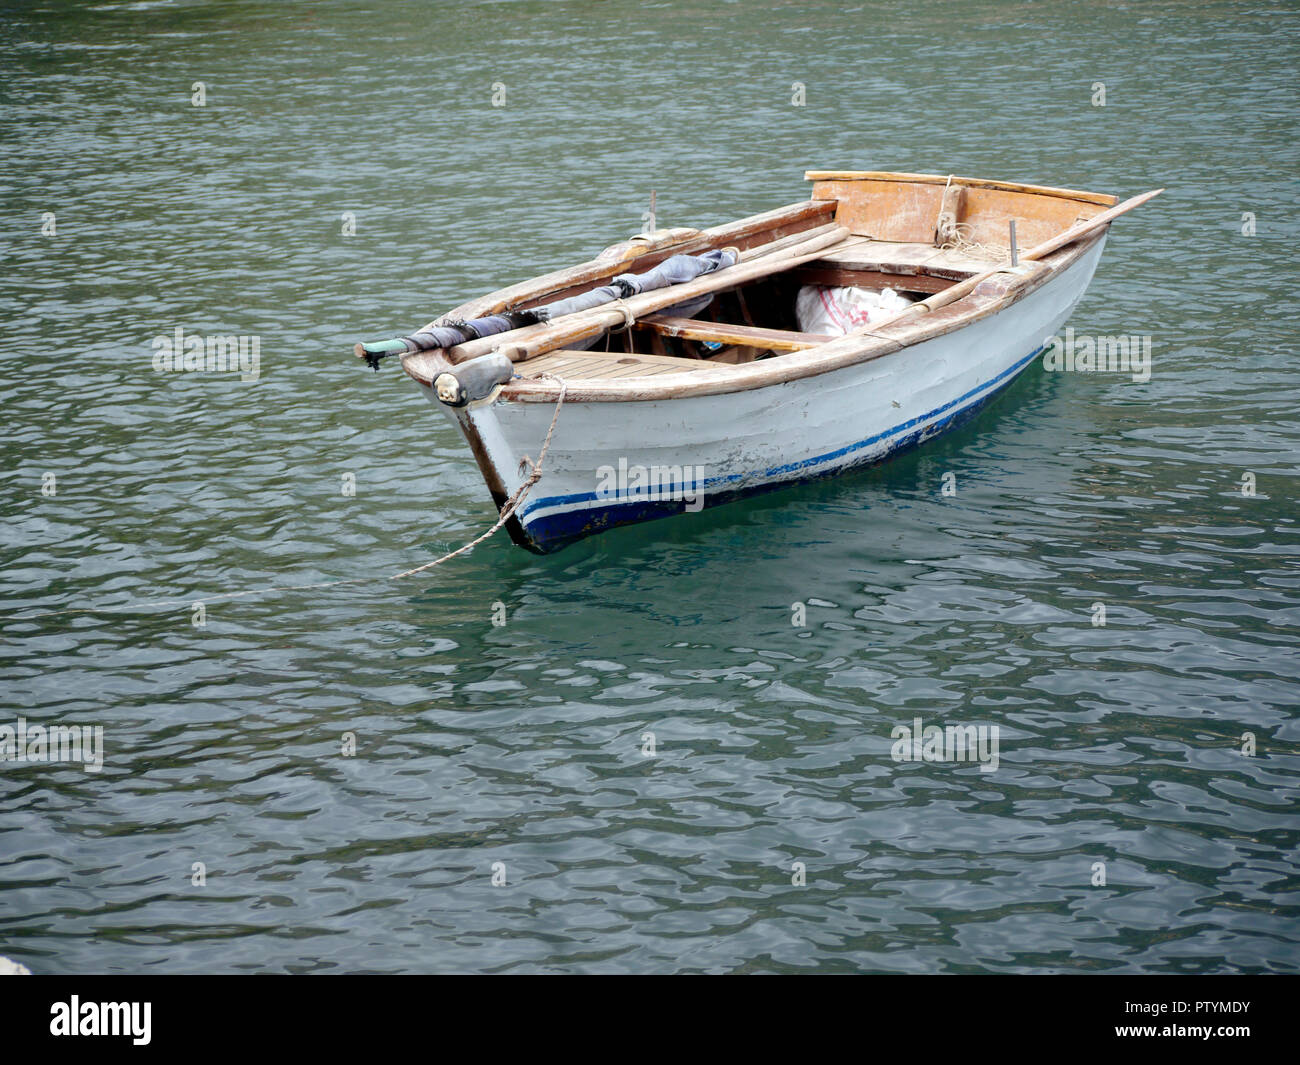 Small, old, battered, wooden dinghy with oars and folded home-made